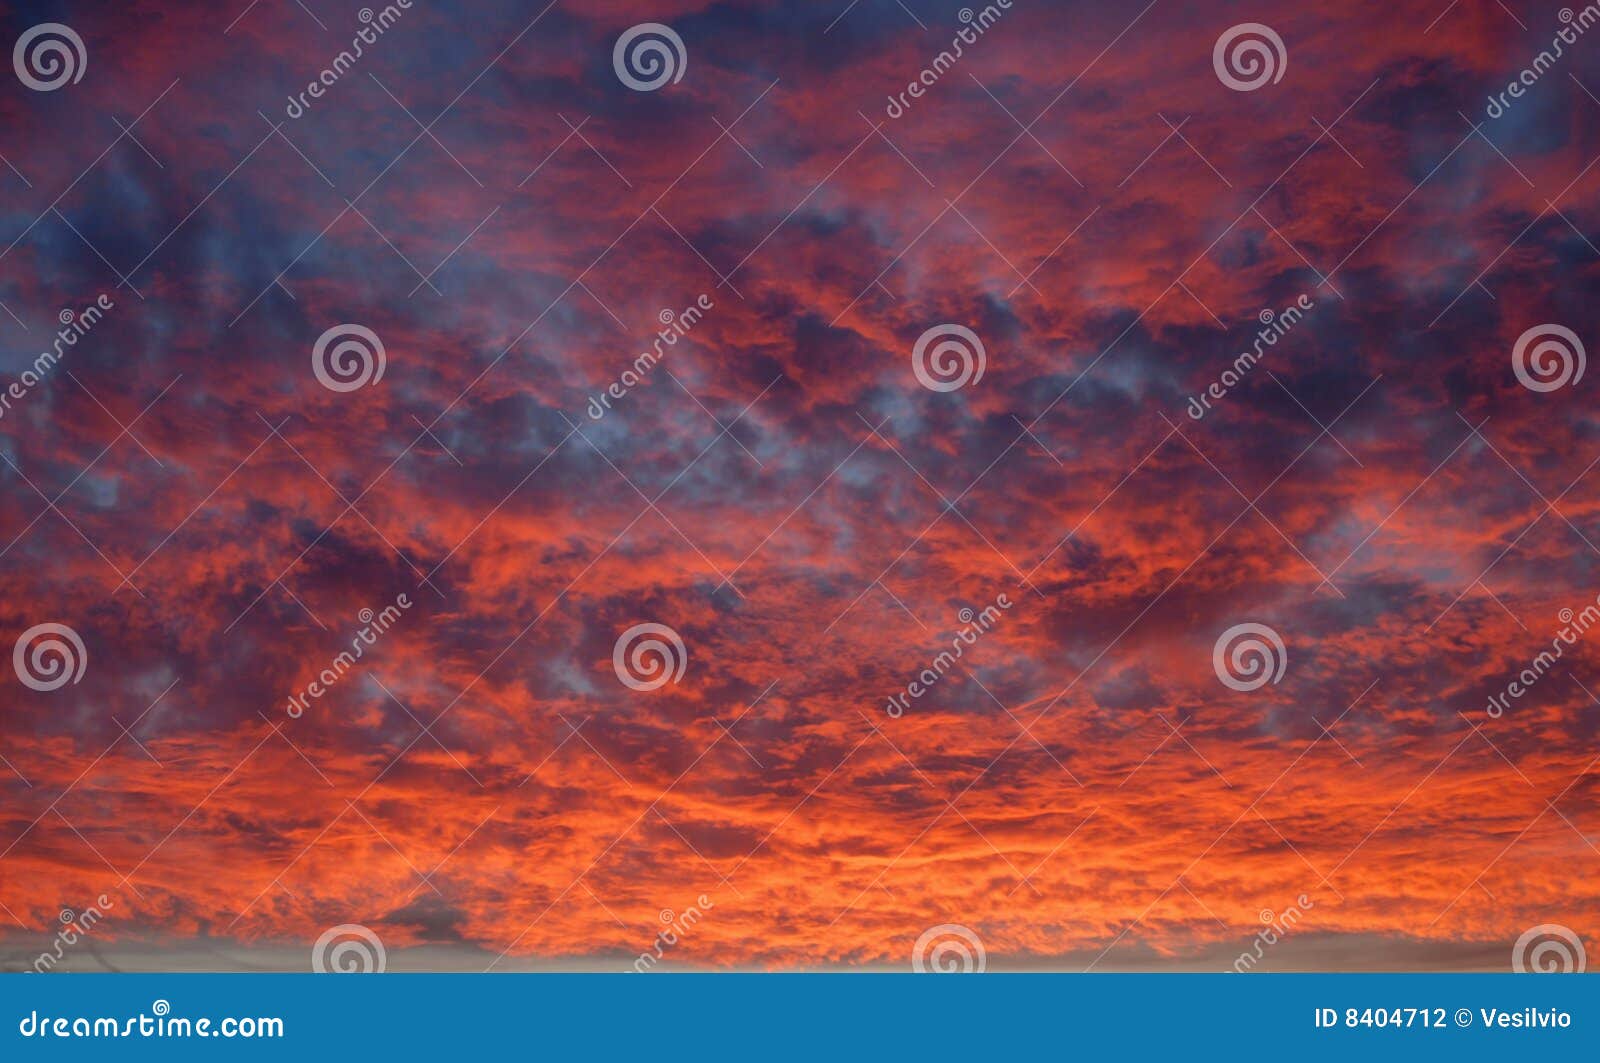 Sunset cloudscape stock photo. Image of heaven, back, dawn - 8404712